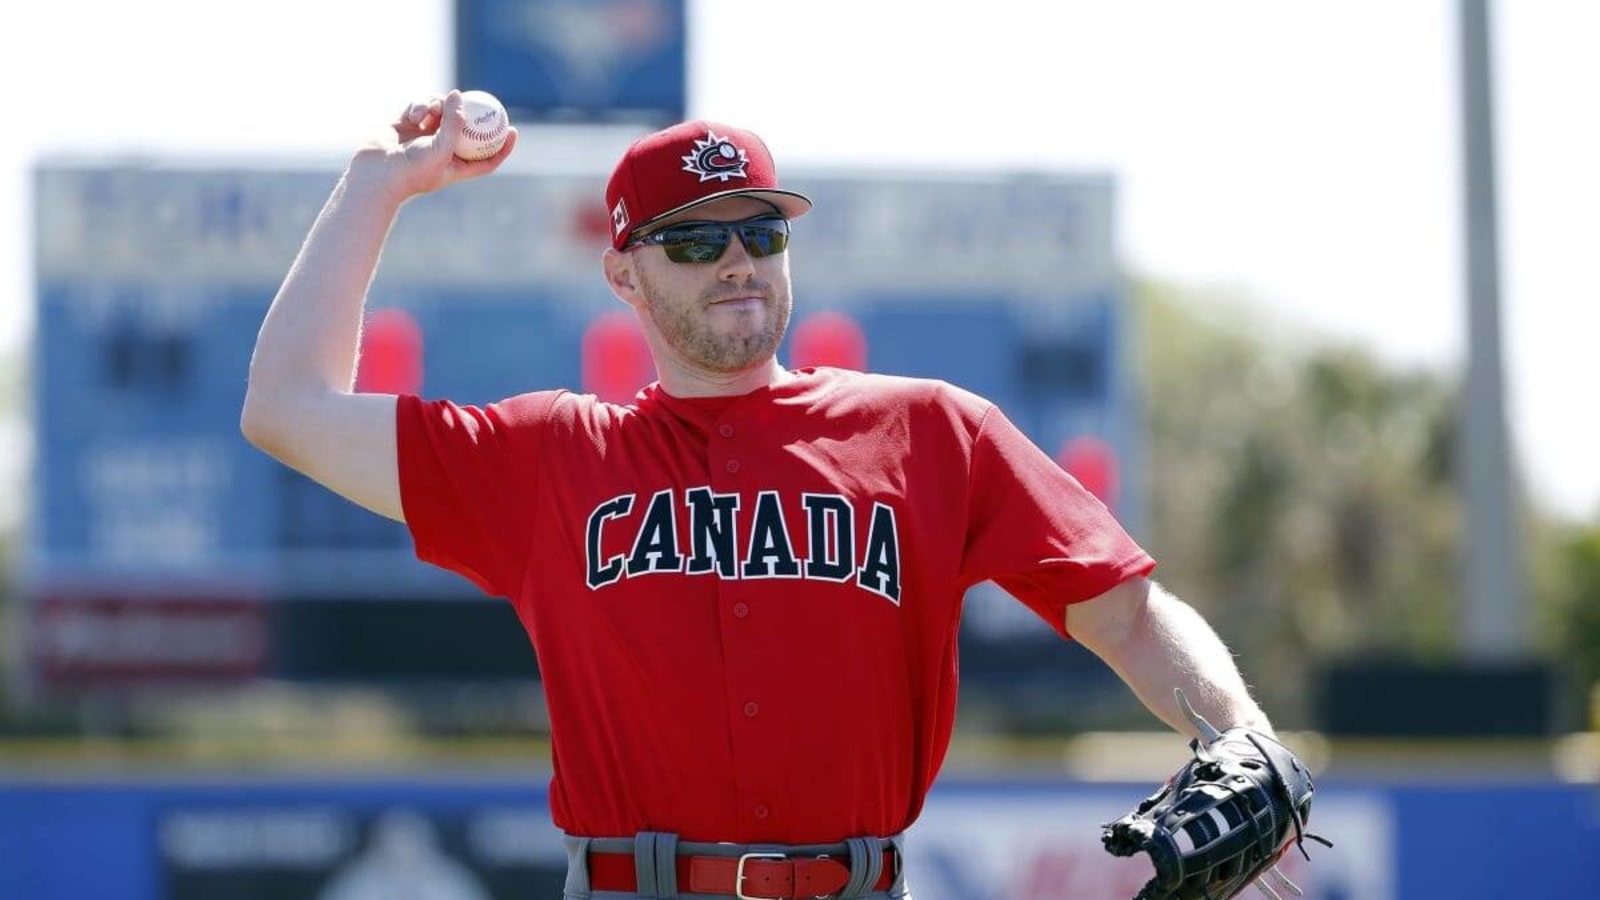 Playing for Team Canada in WBC Means a Lot to Freddie Freeman